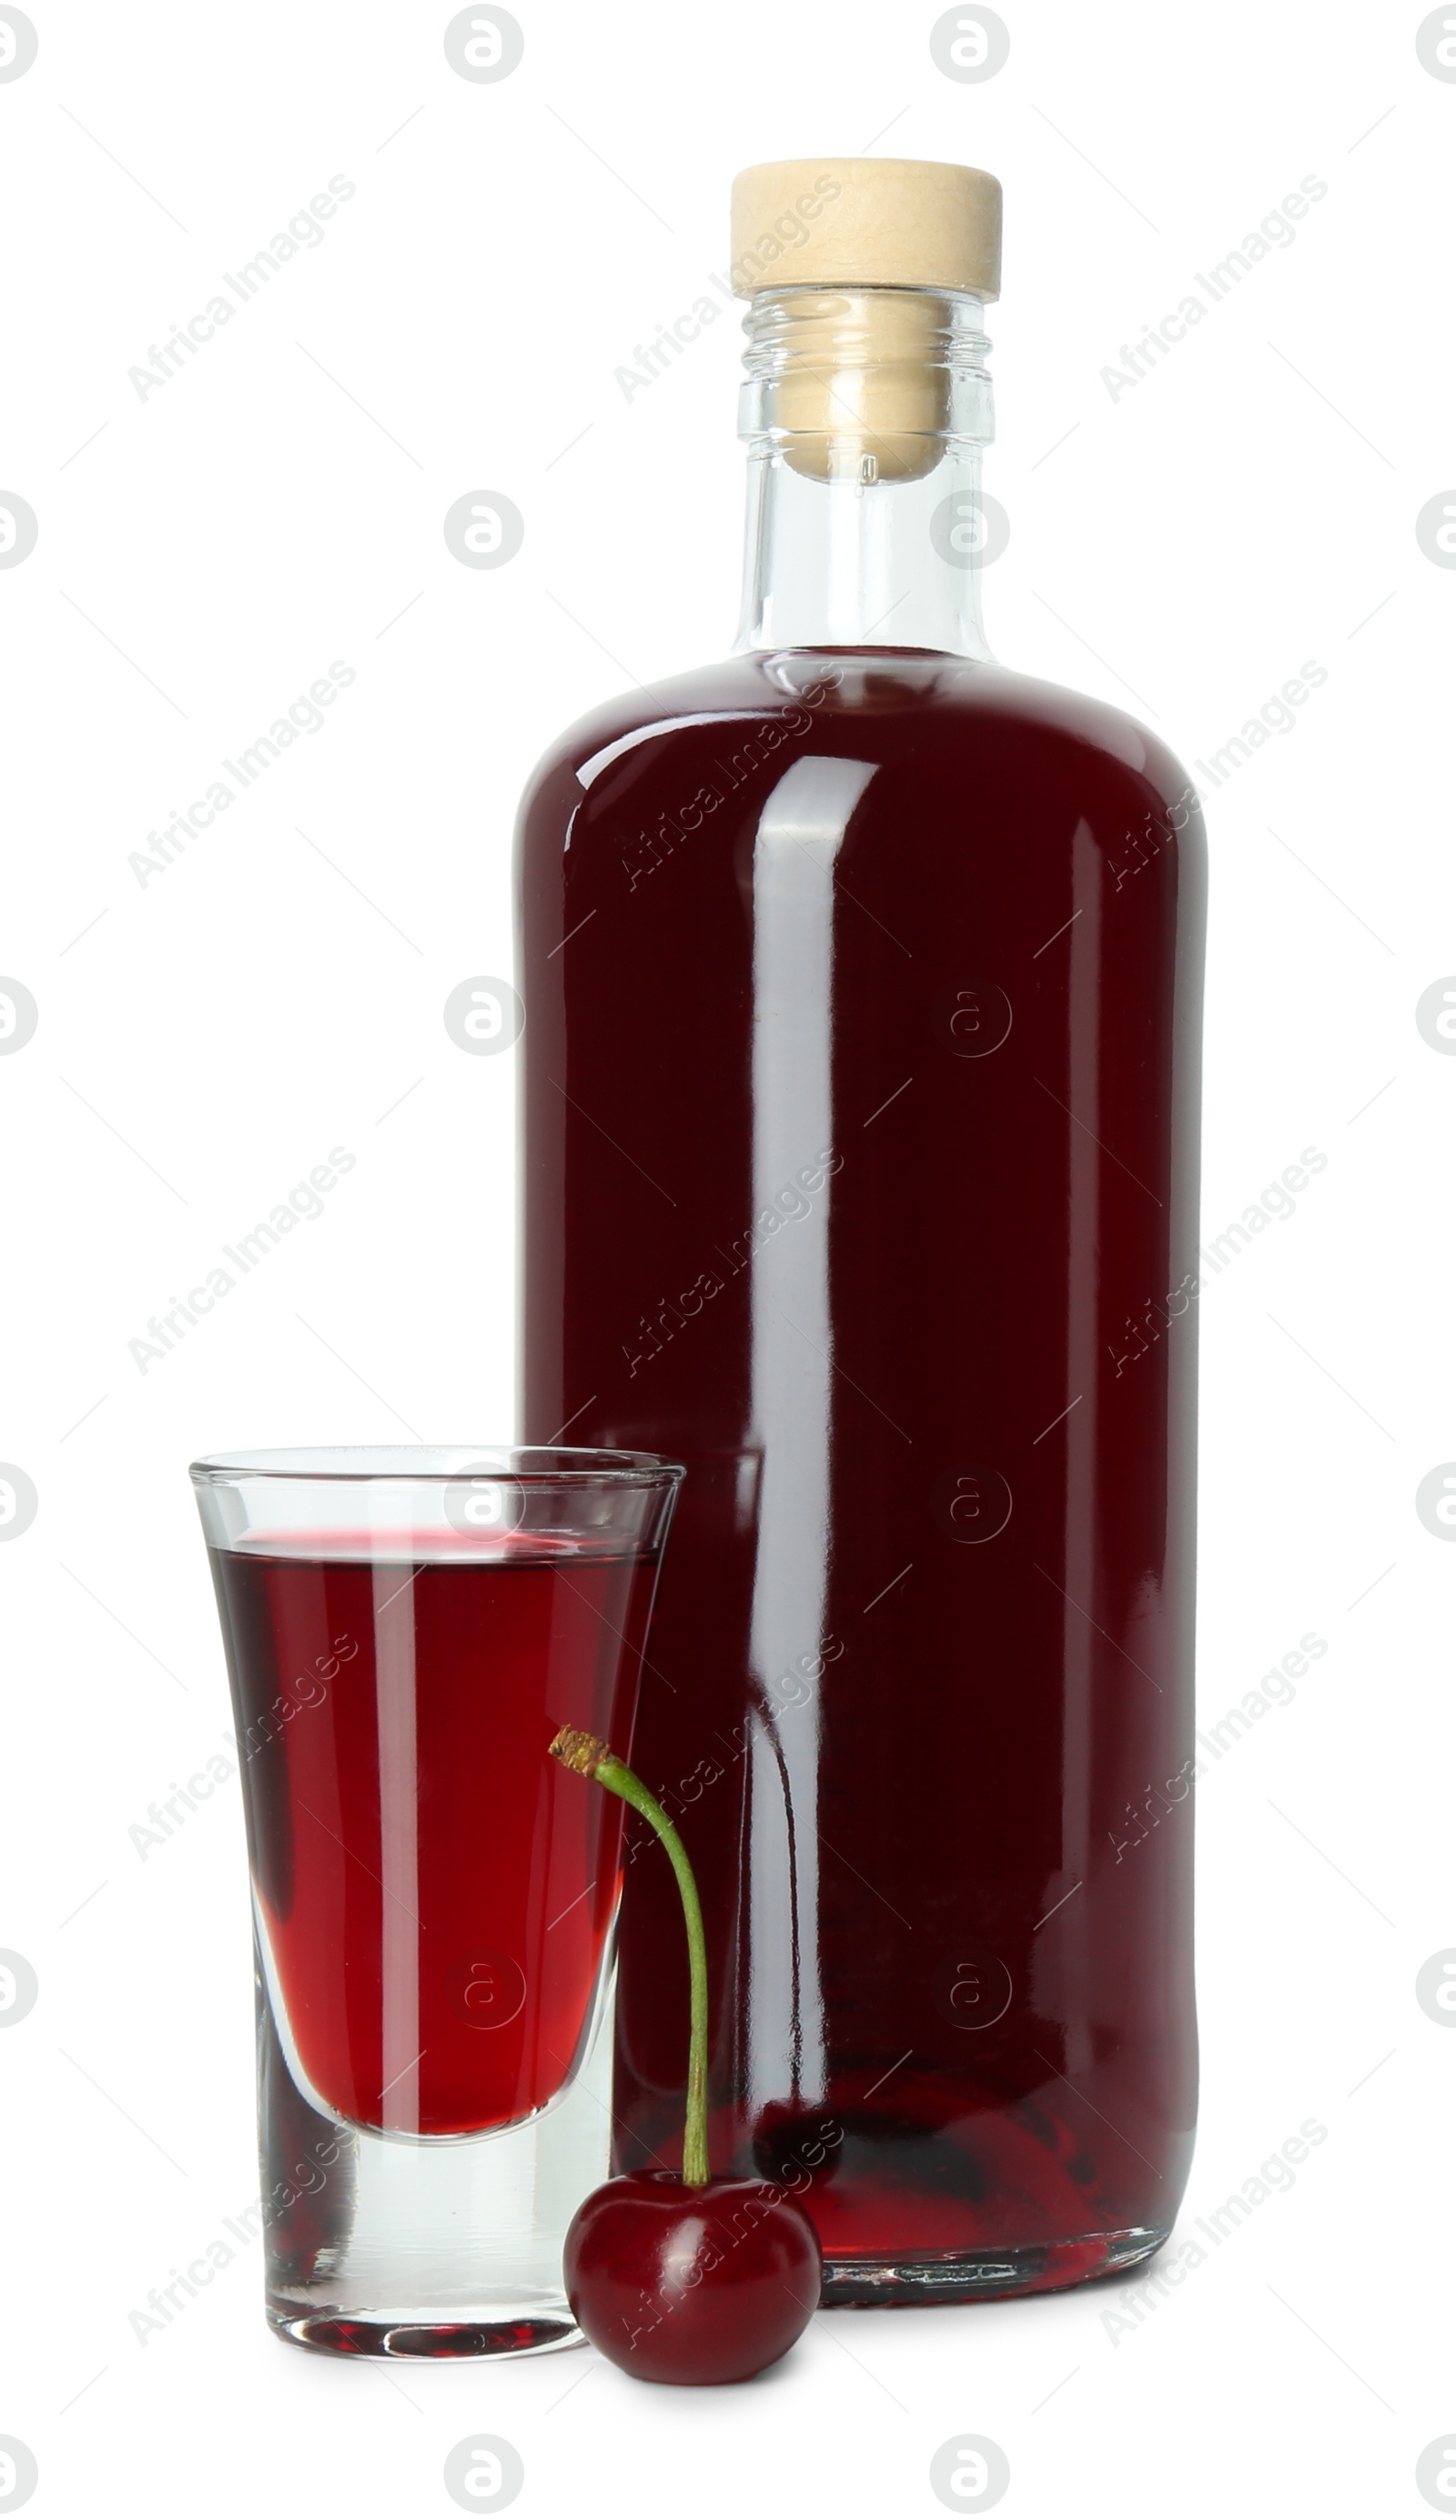 Photo of Bottle and shot glass of delicious cherry liqueur isolated on white